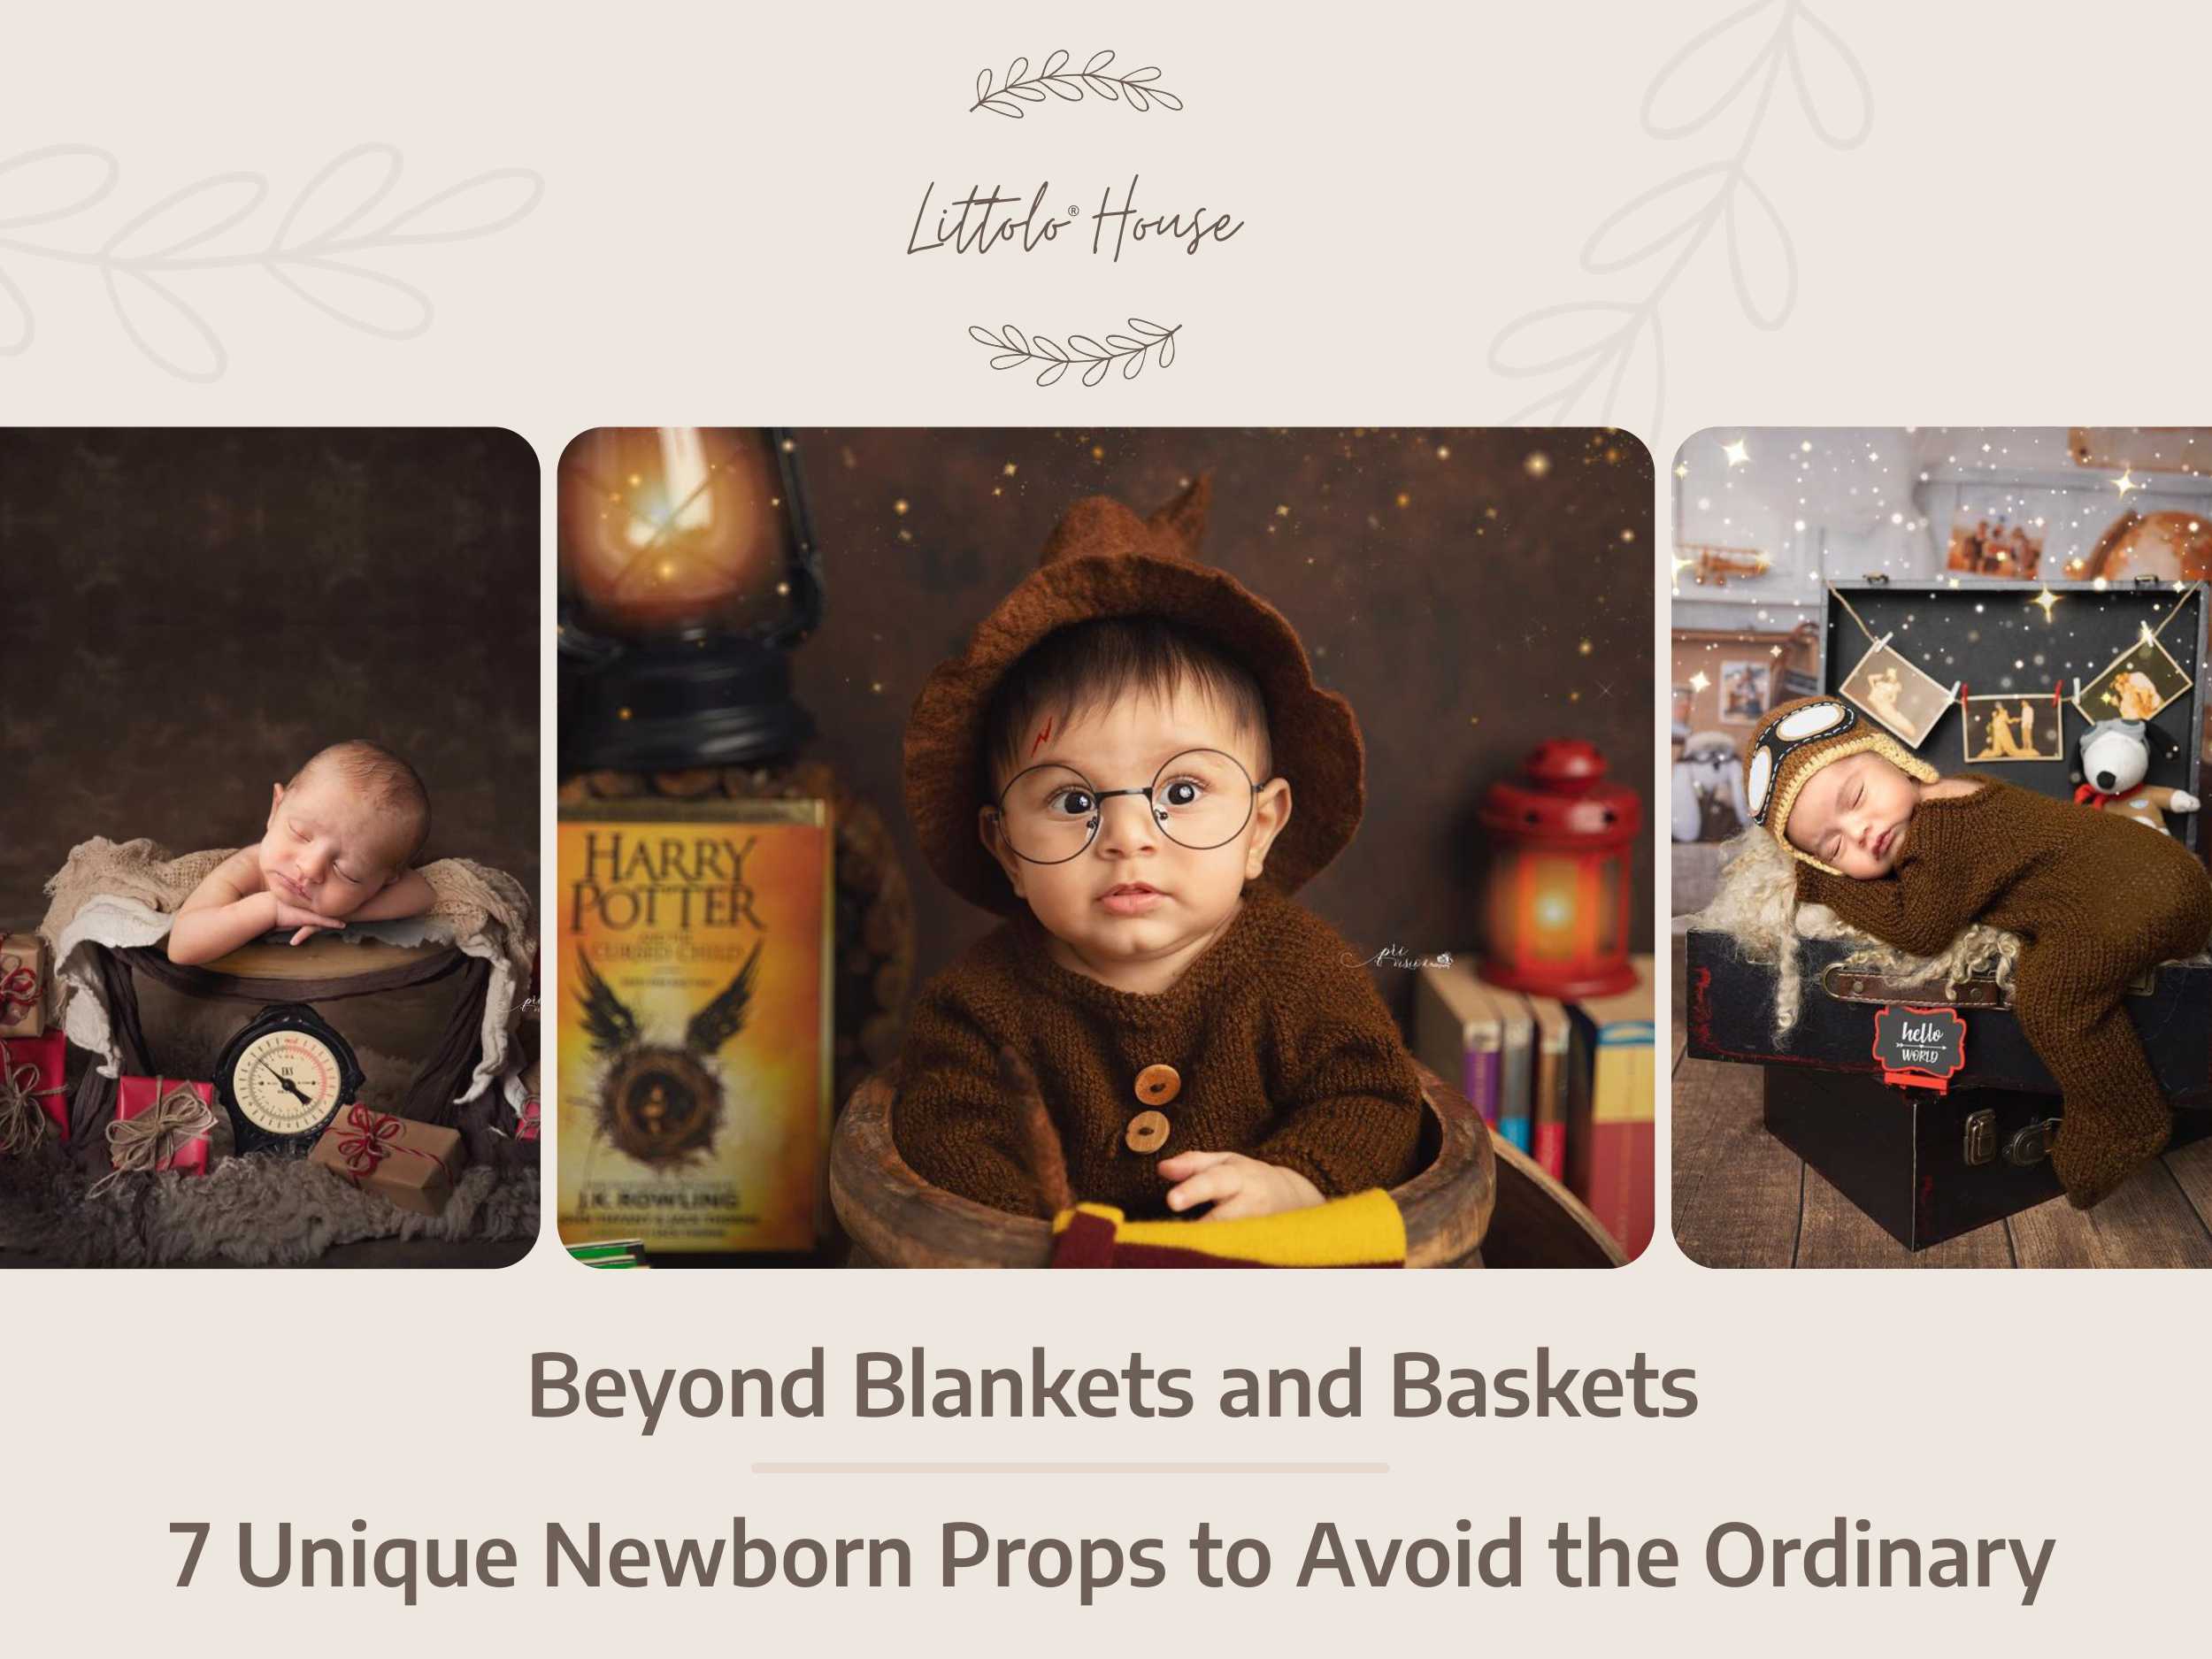 Beyond Blankets and Baskets: 7 Unique Newborn Props to Avoid the Ordinary